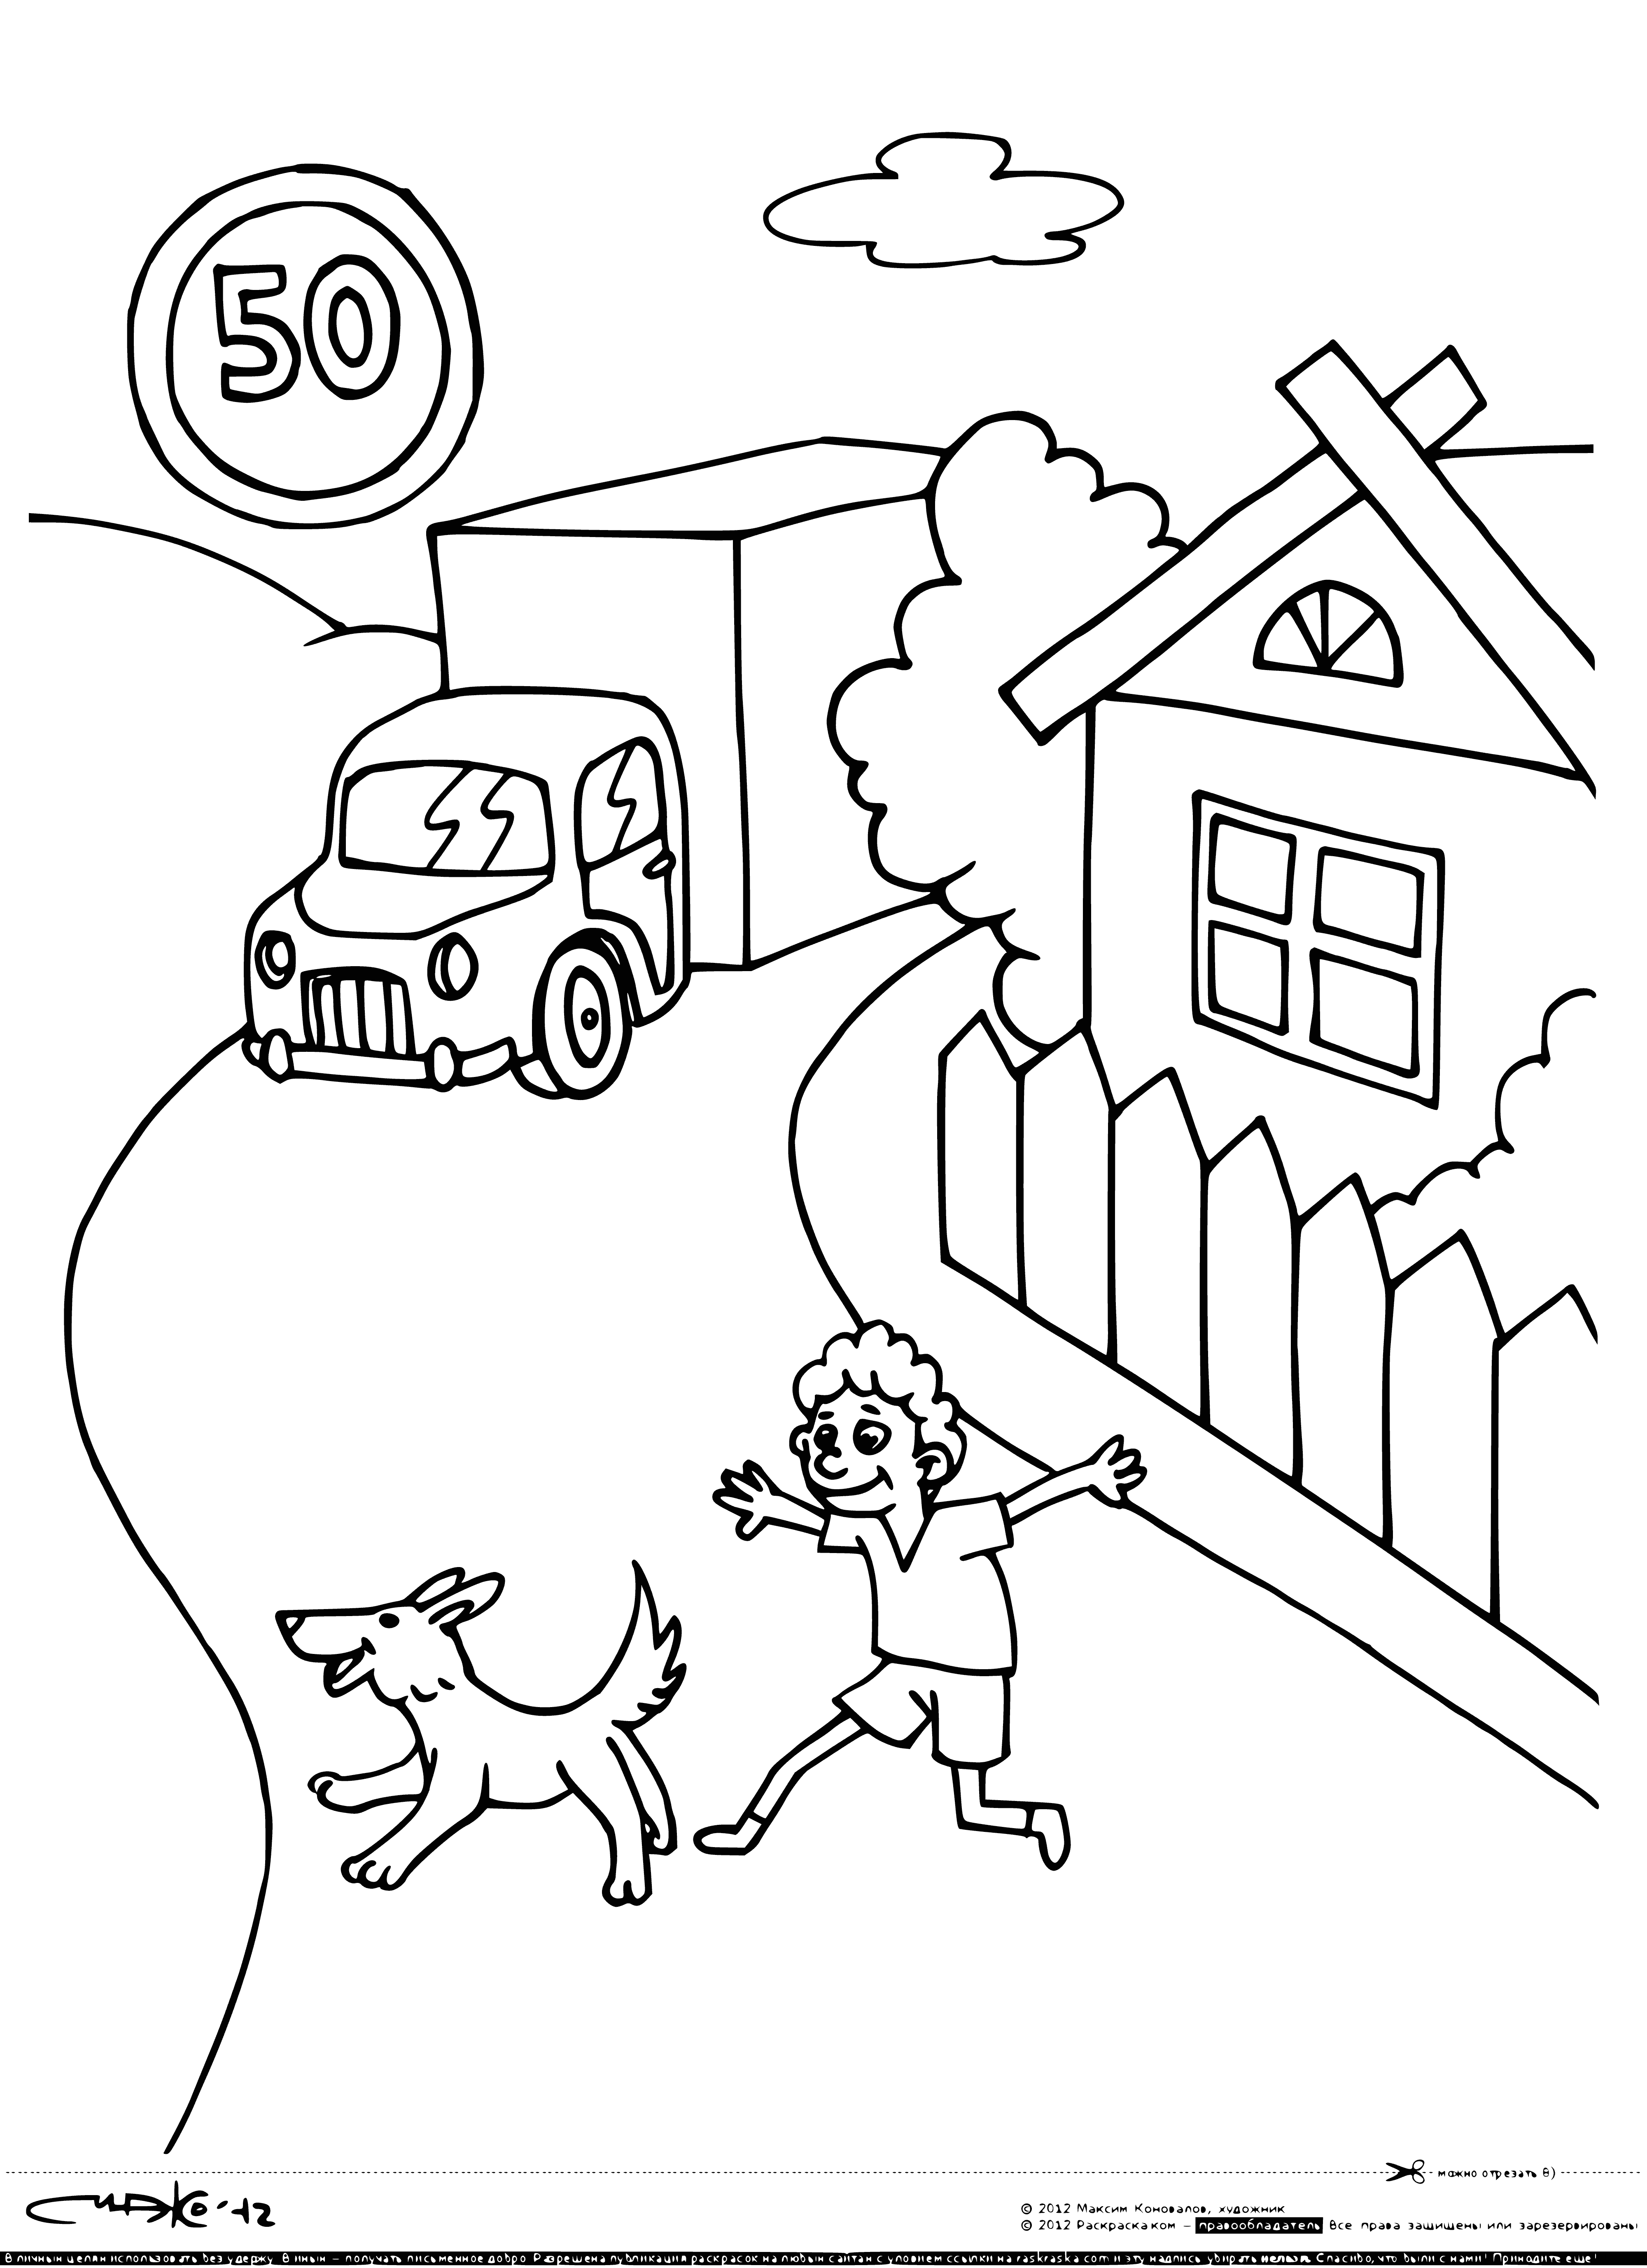 coloring page: Max speed limit sign: blue w/ white #70.